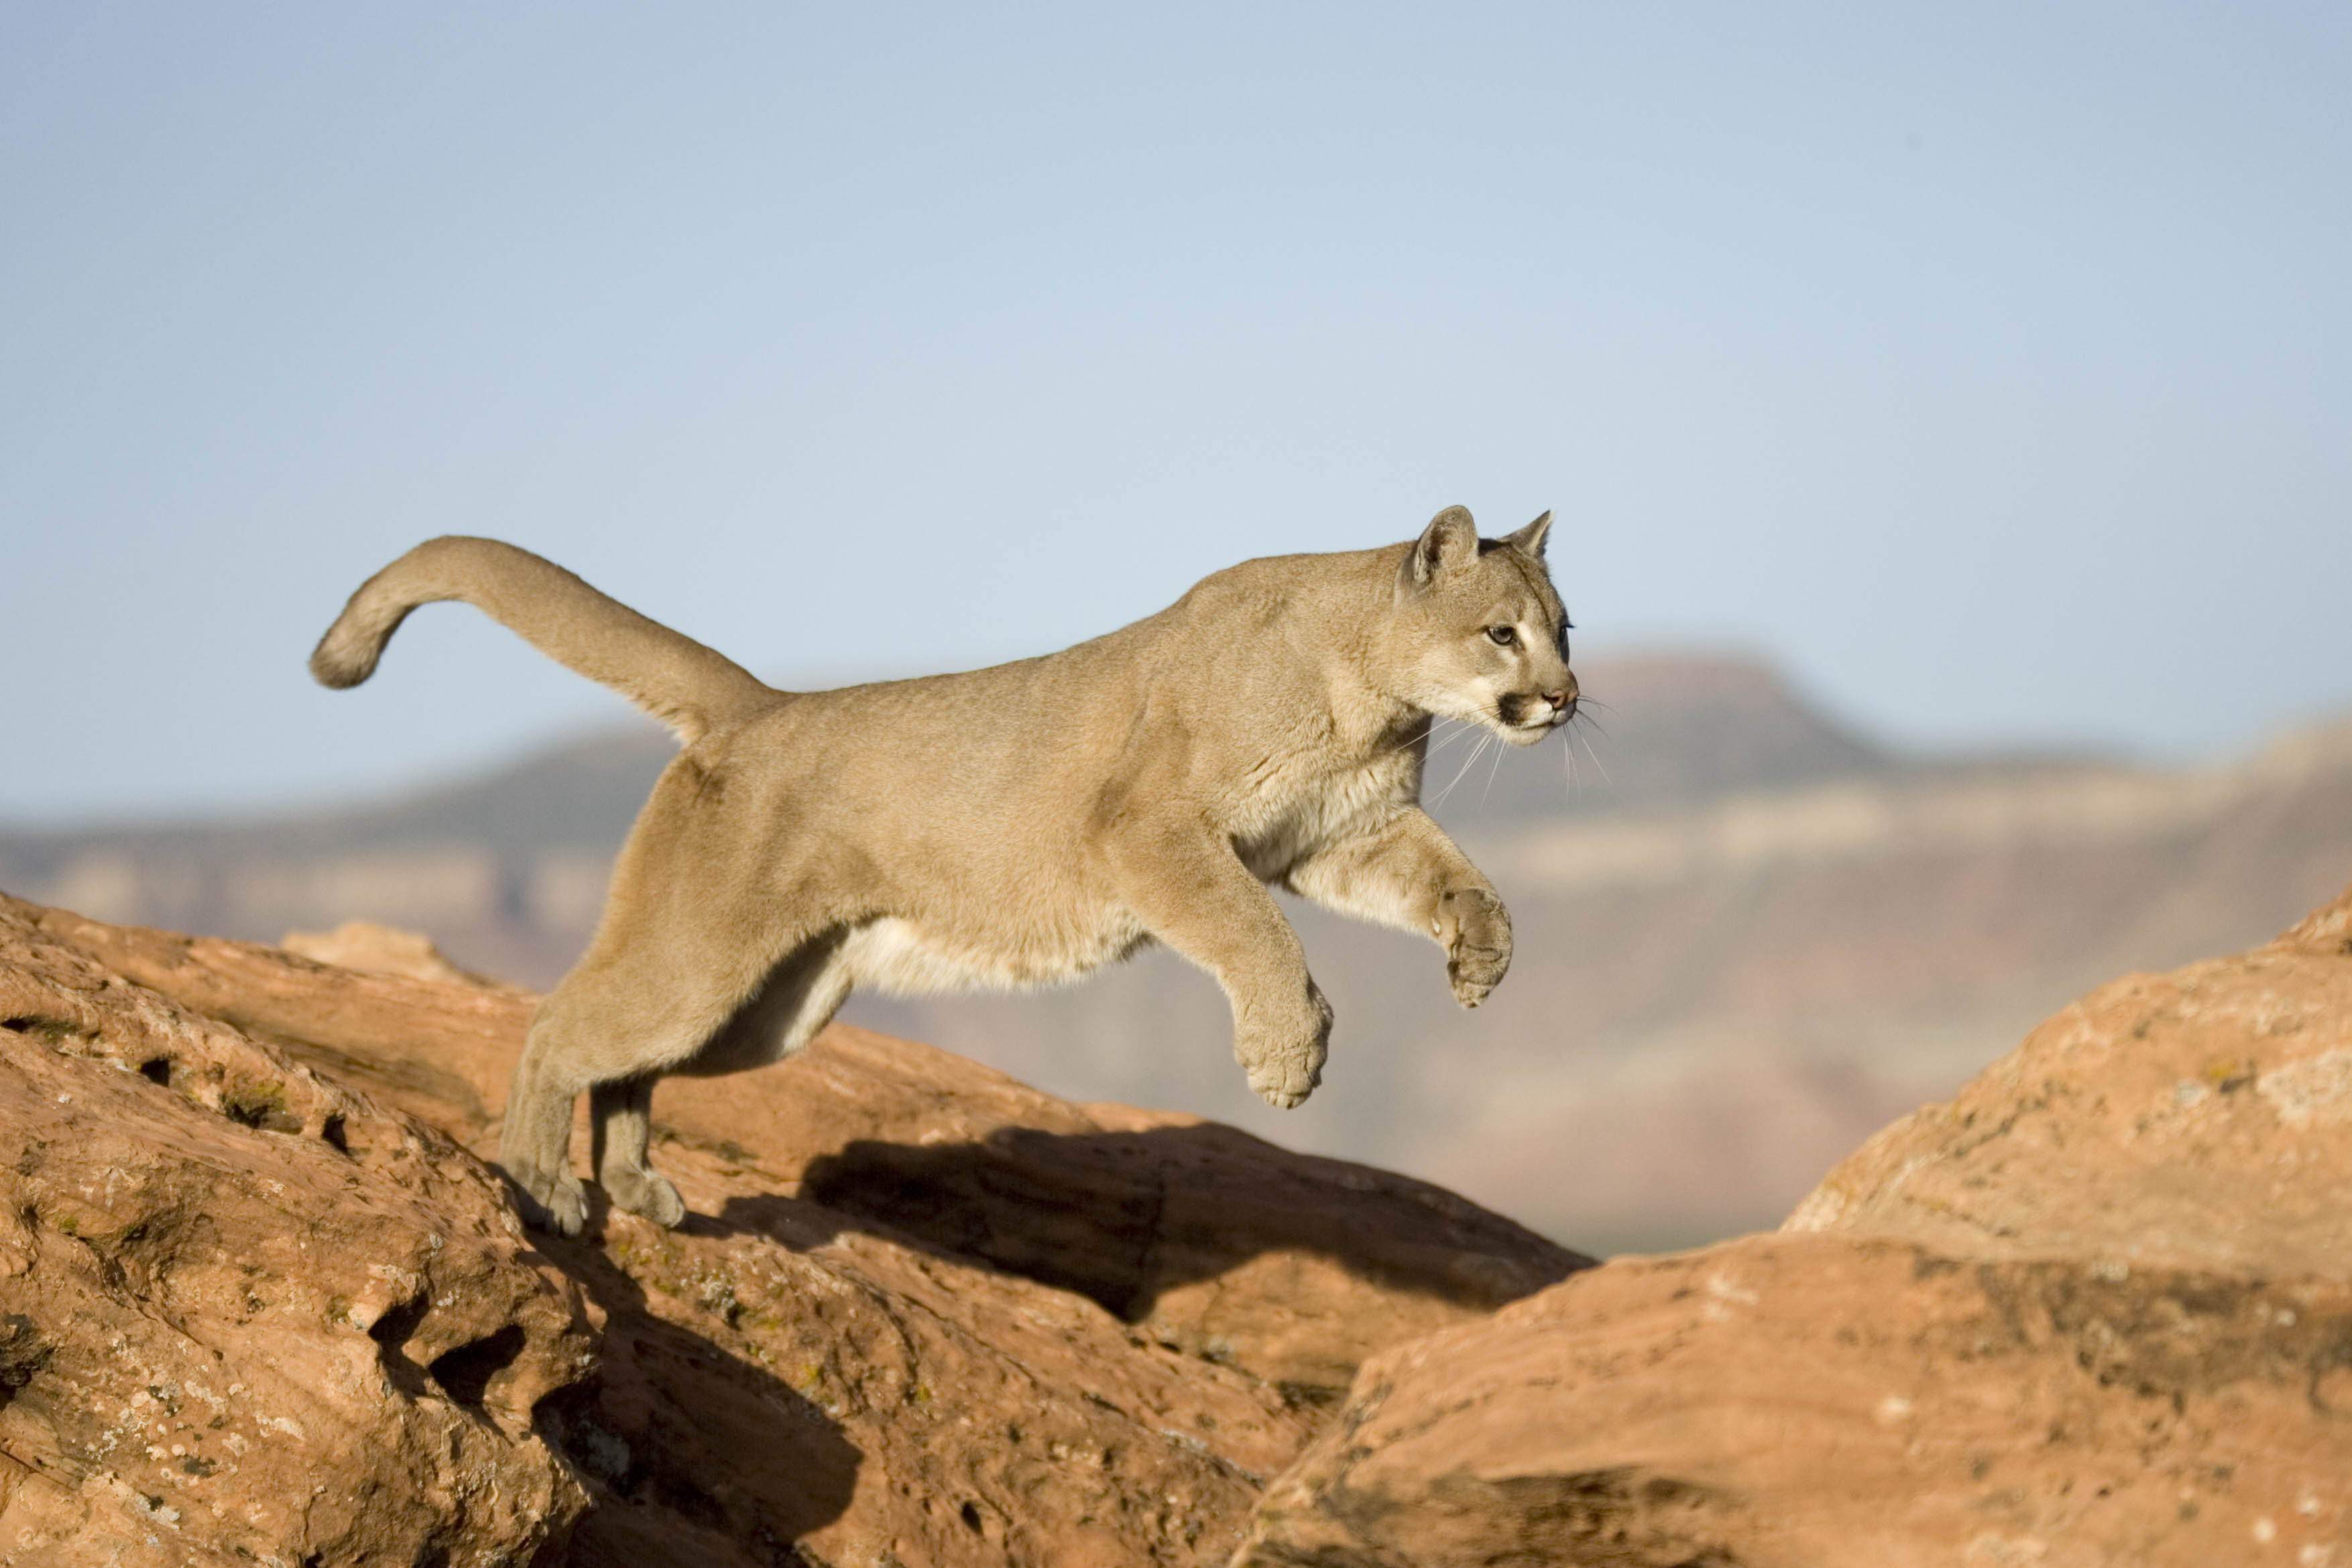 A mountain lion was captured leaping from rock in North America. | Source: Getty Images